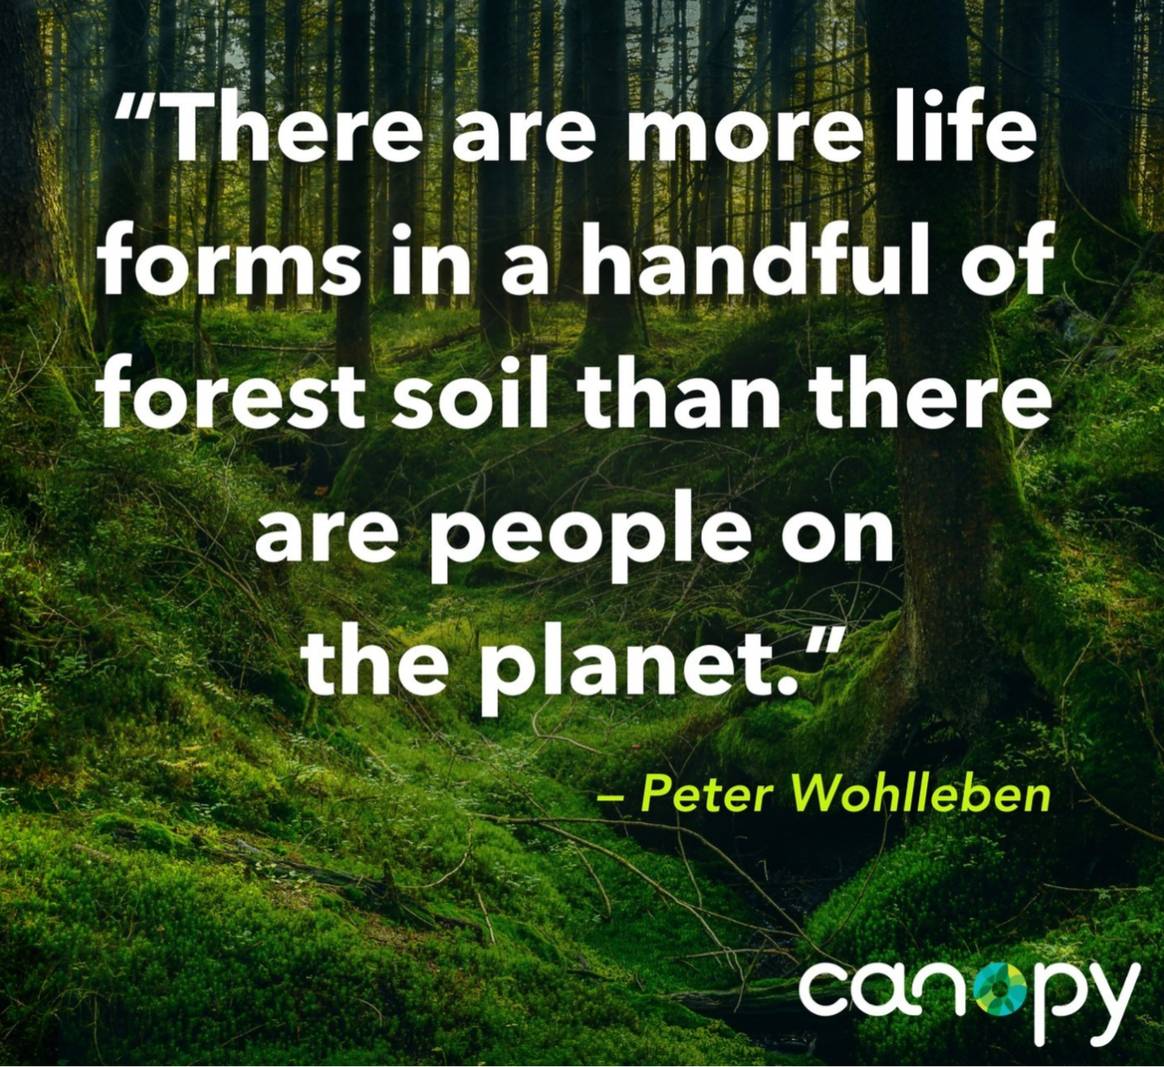 There are more life forms in a handful of forest soil than there are people on the planet.